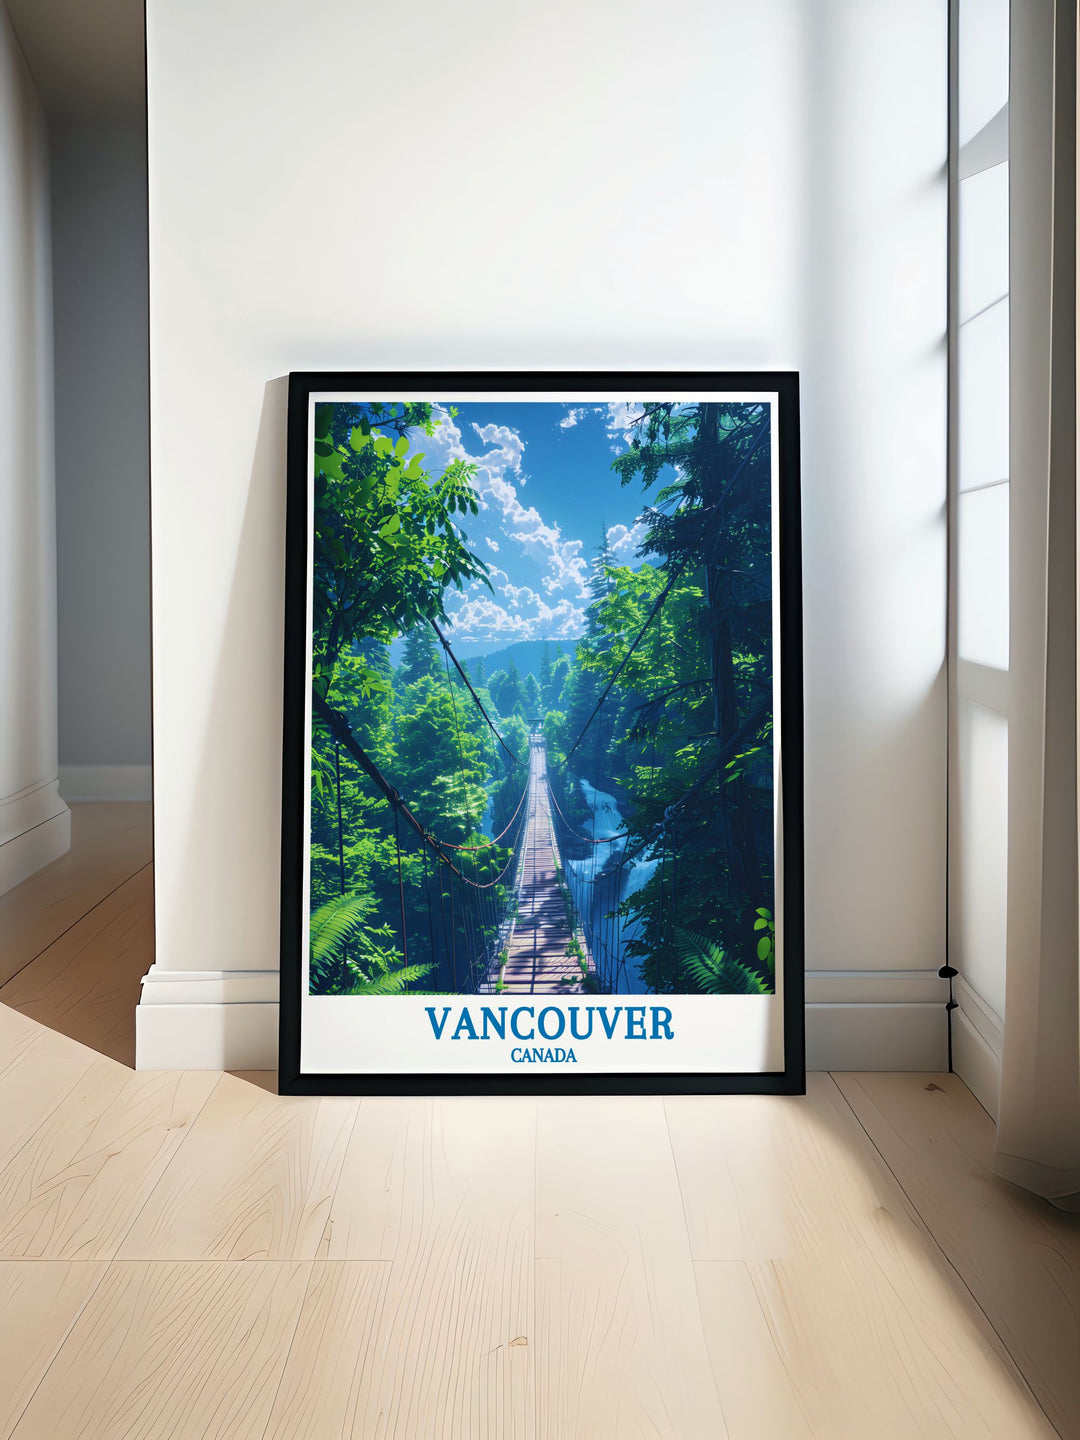 Detailed art print of the Capilano Suspension Bridge in Vancouver, capturing its thrilling span over the lush forest. Perfect for adventure enthusiasts, this travel poster brings the excitement and beauty of this iconic landmark into your home decor.